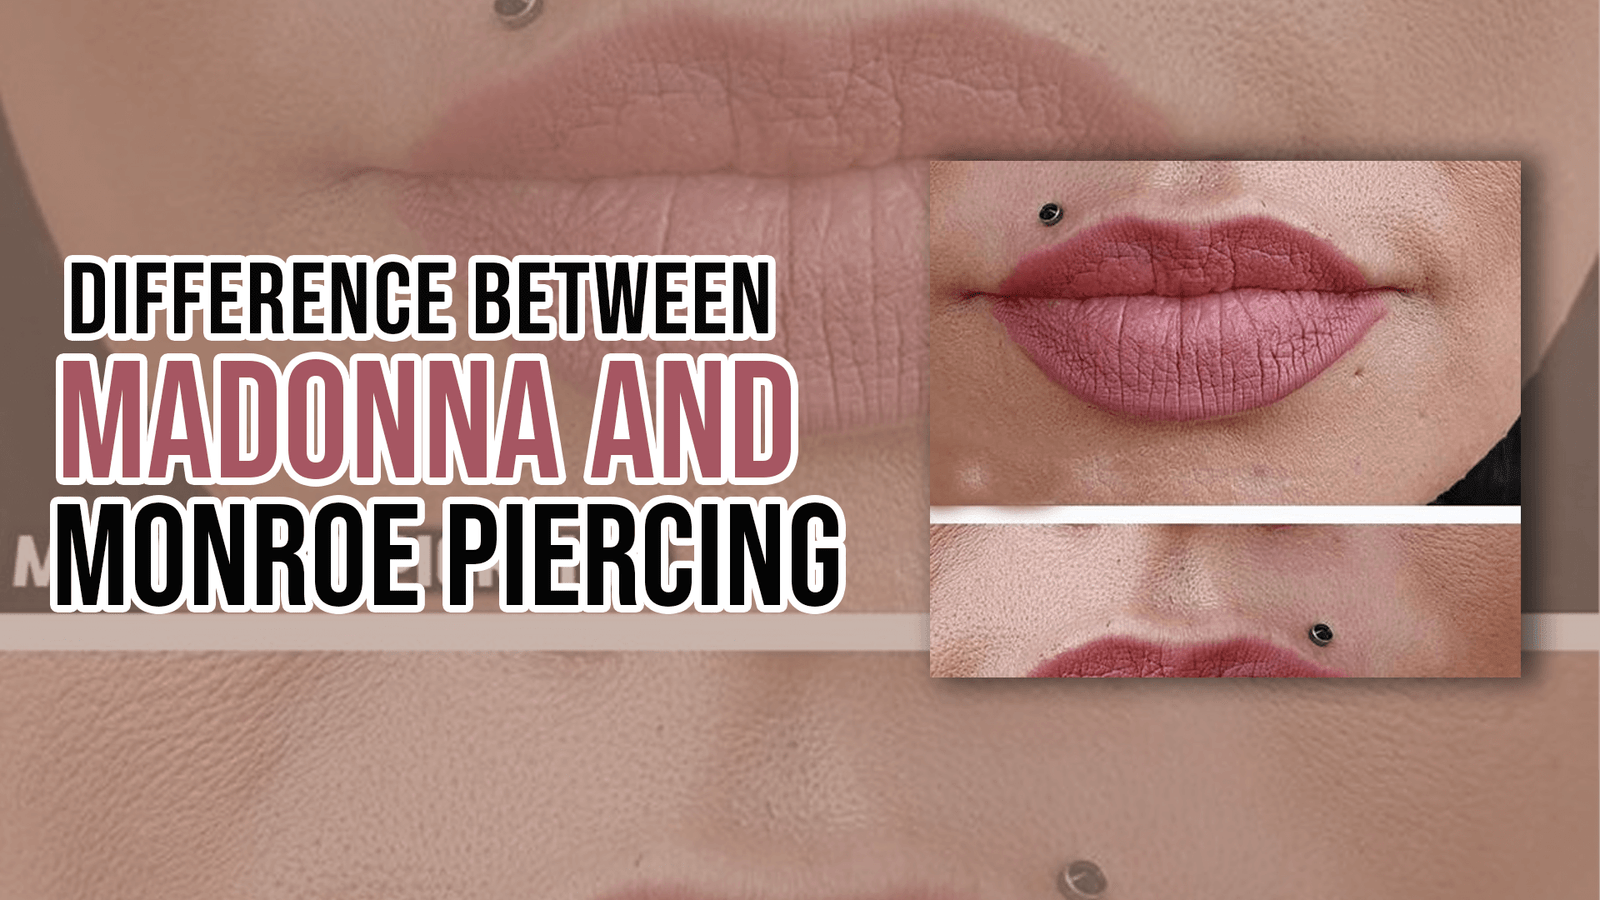 Difference between Madonna and Monroe Piercing